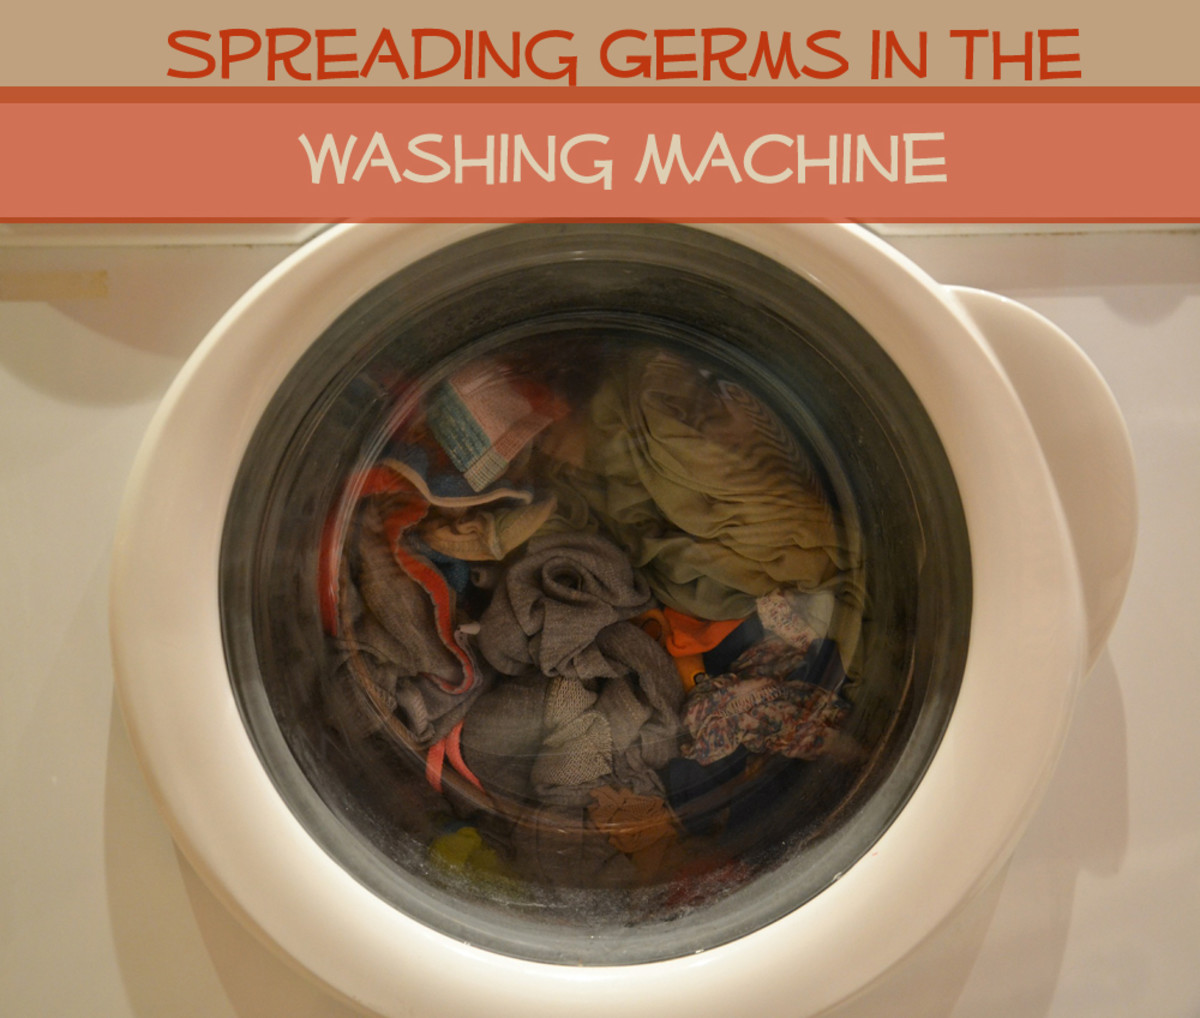 Cold Germs Spread When You Wash Clothes